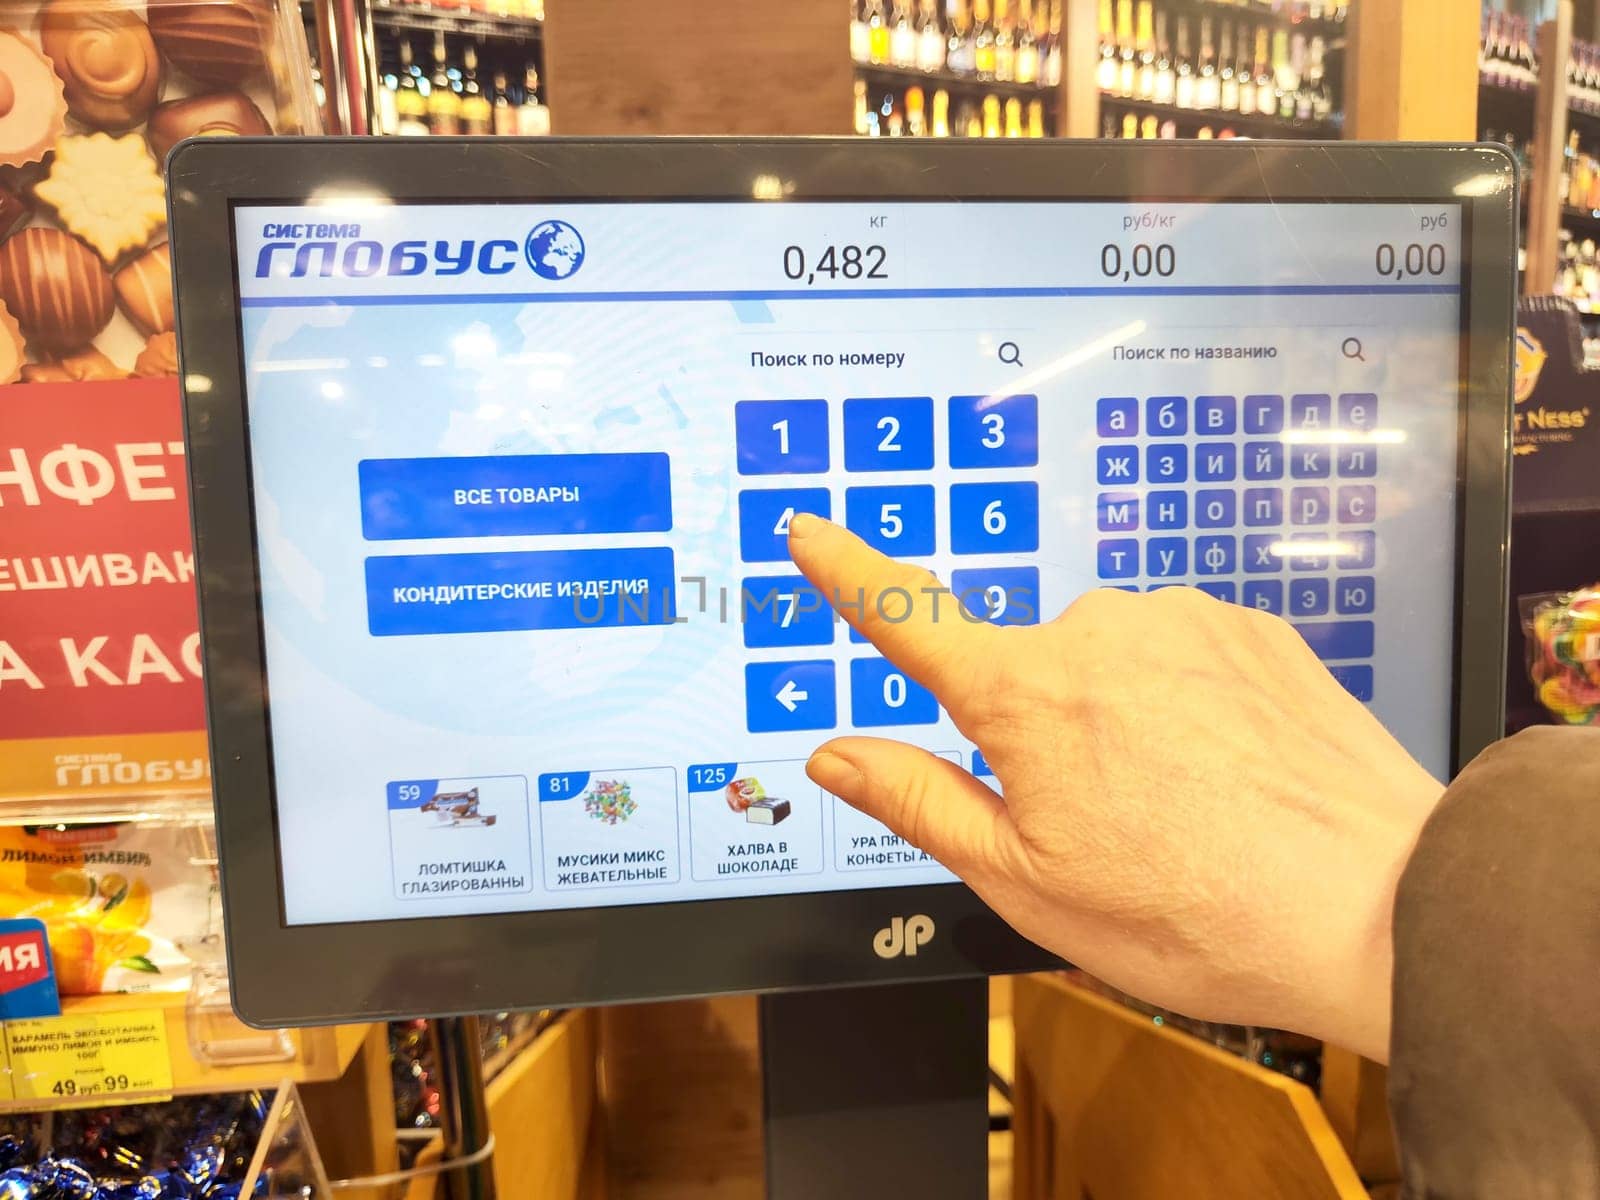 Kirov, Russia - April 17, 2024: Customer Weighing Produce on Digital Scales at Grocery Store. A person is using a touchscreen to weigh items at store